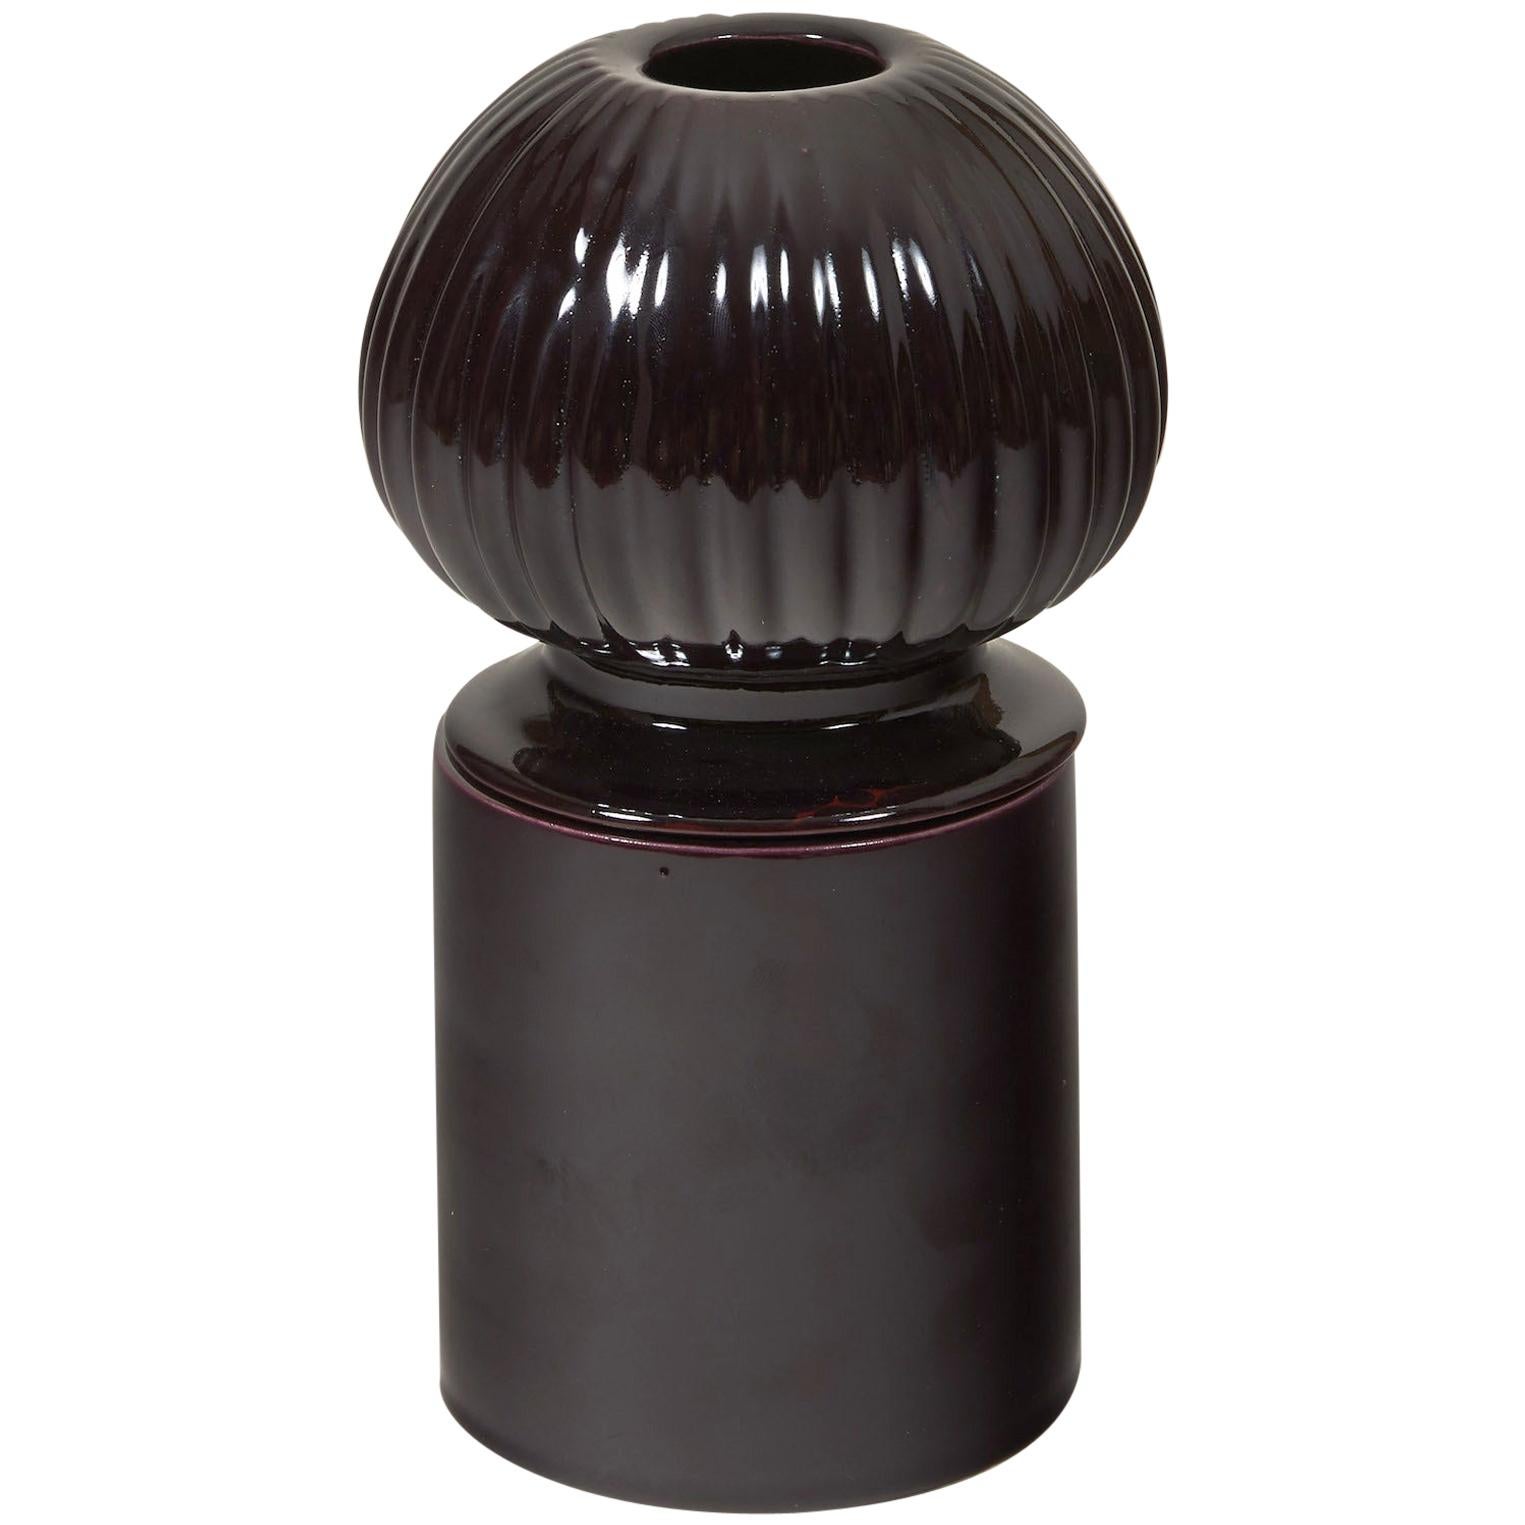 Glazed Purple Medium Ceramic Candleholder with Sculpted Lid by Laura Gonzalez